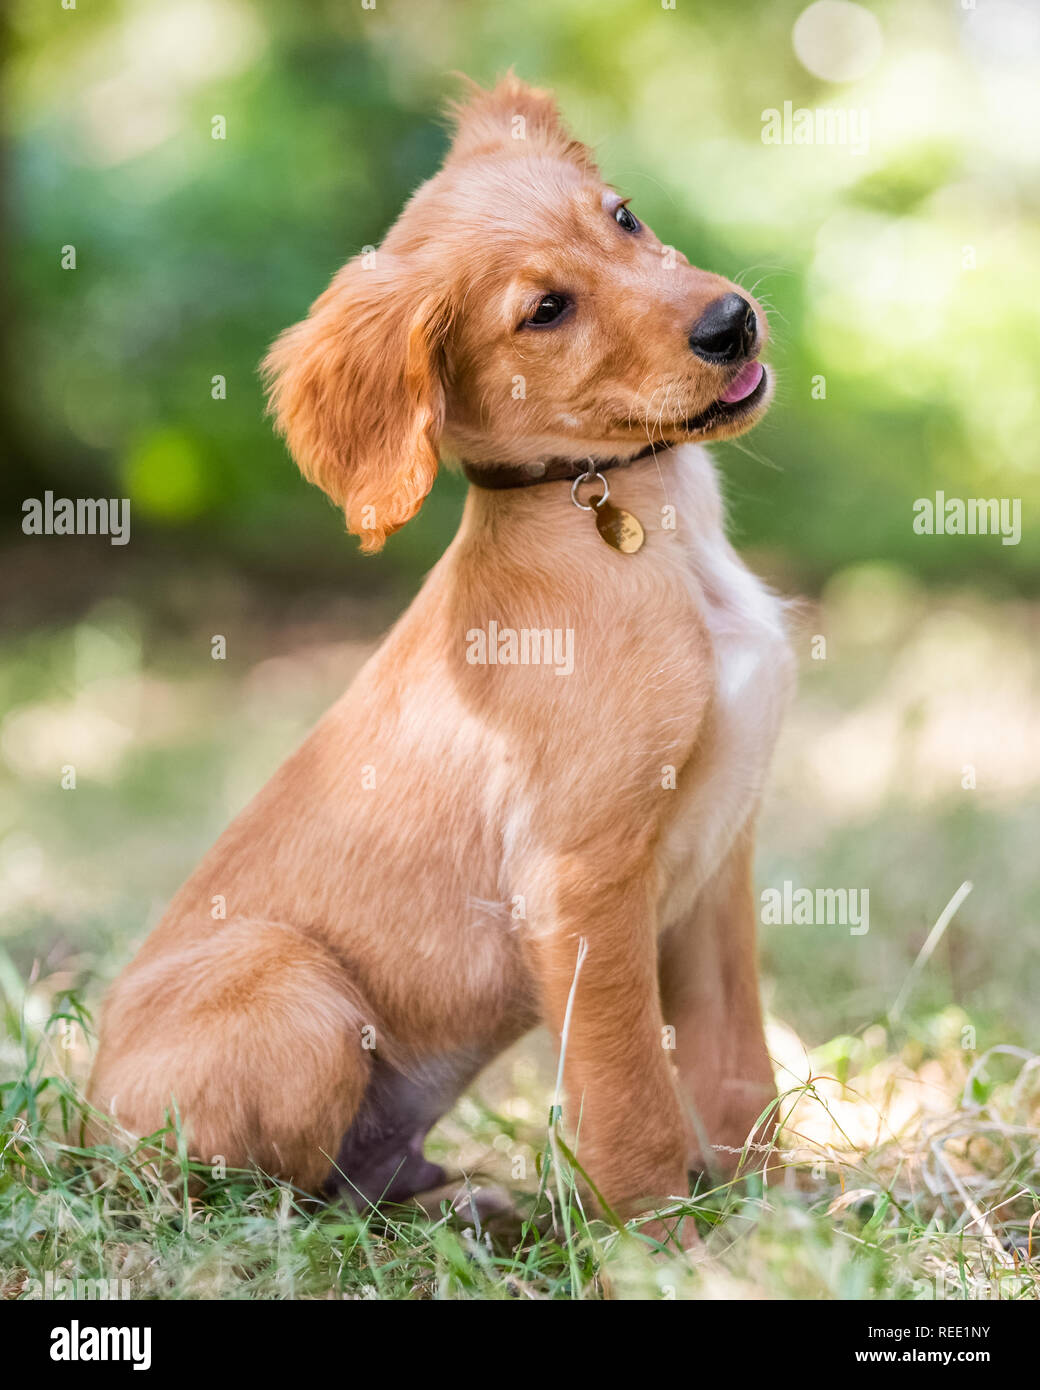 A Golden Retriever puppy sitting in rough grass with its head tilted to the side on a sunny day. Stock Photo